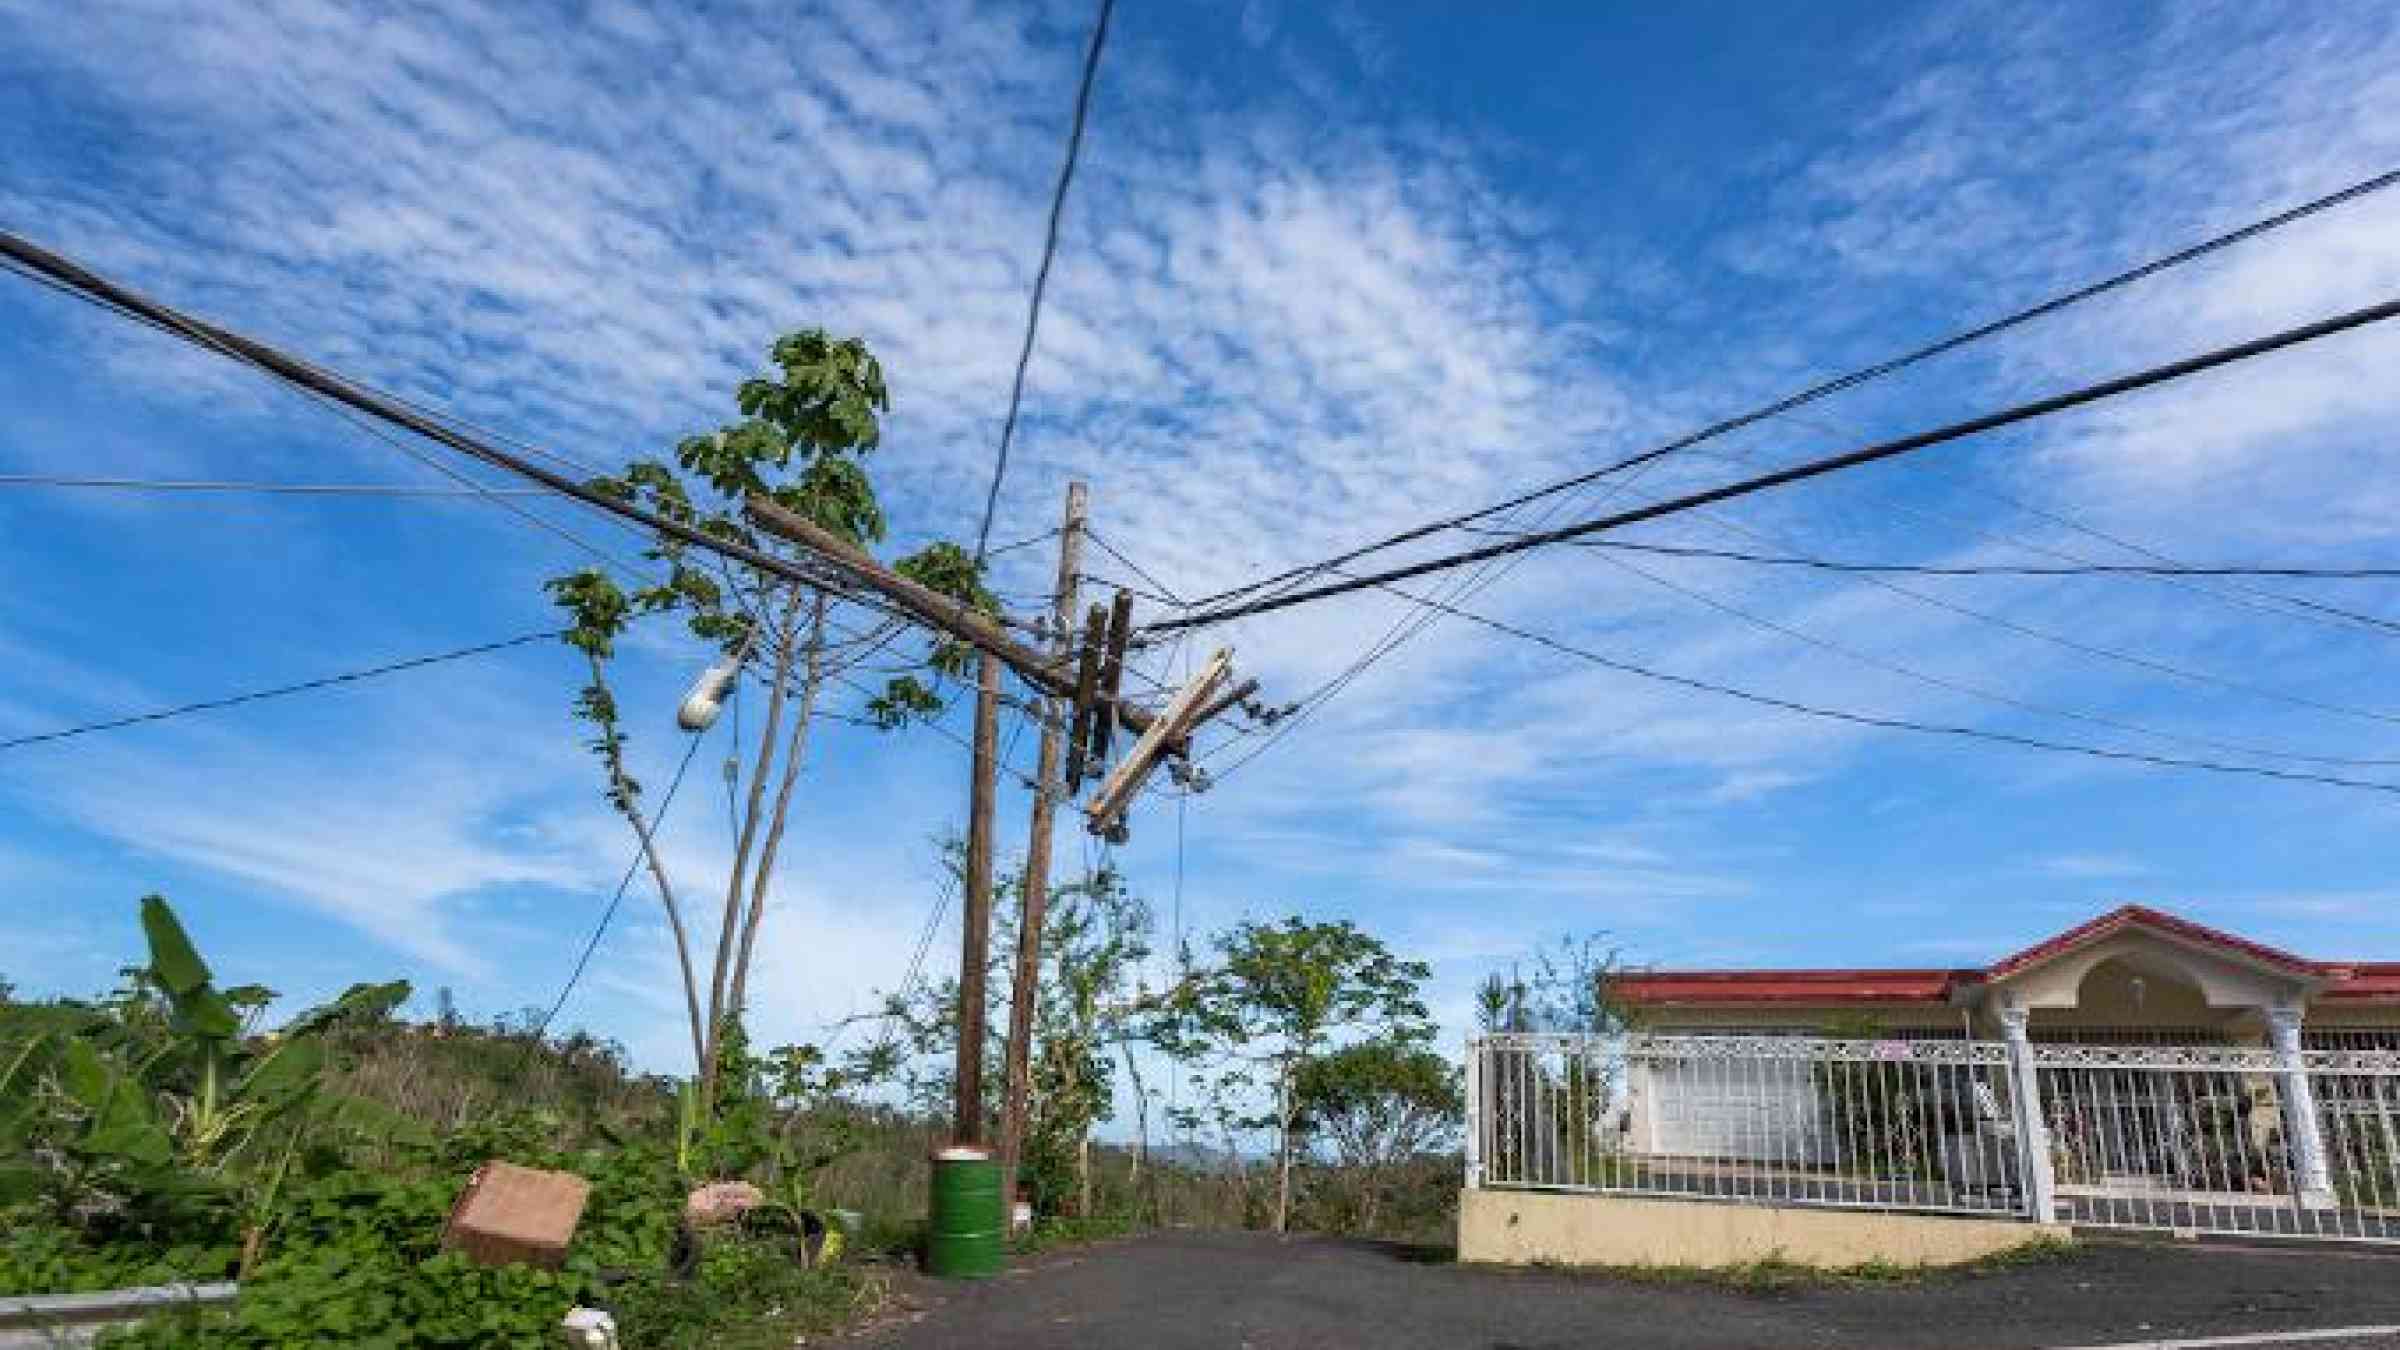 Electric lines in Puerto Rico after Hurricane Maria. RaiPhoto/Shutterstock